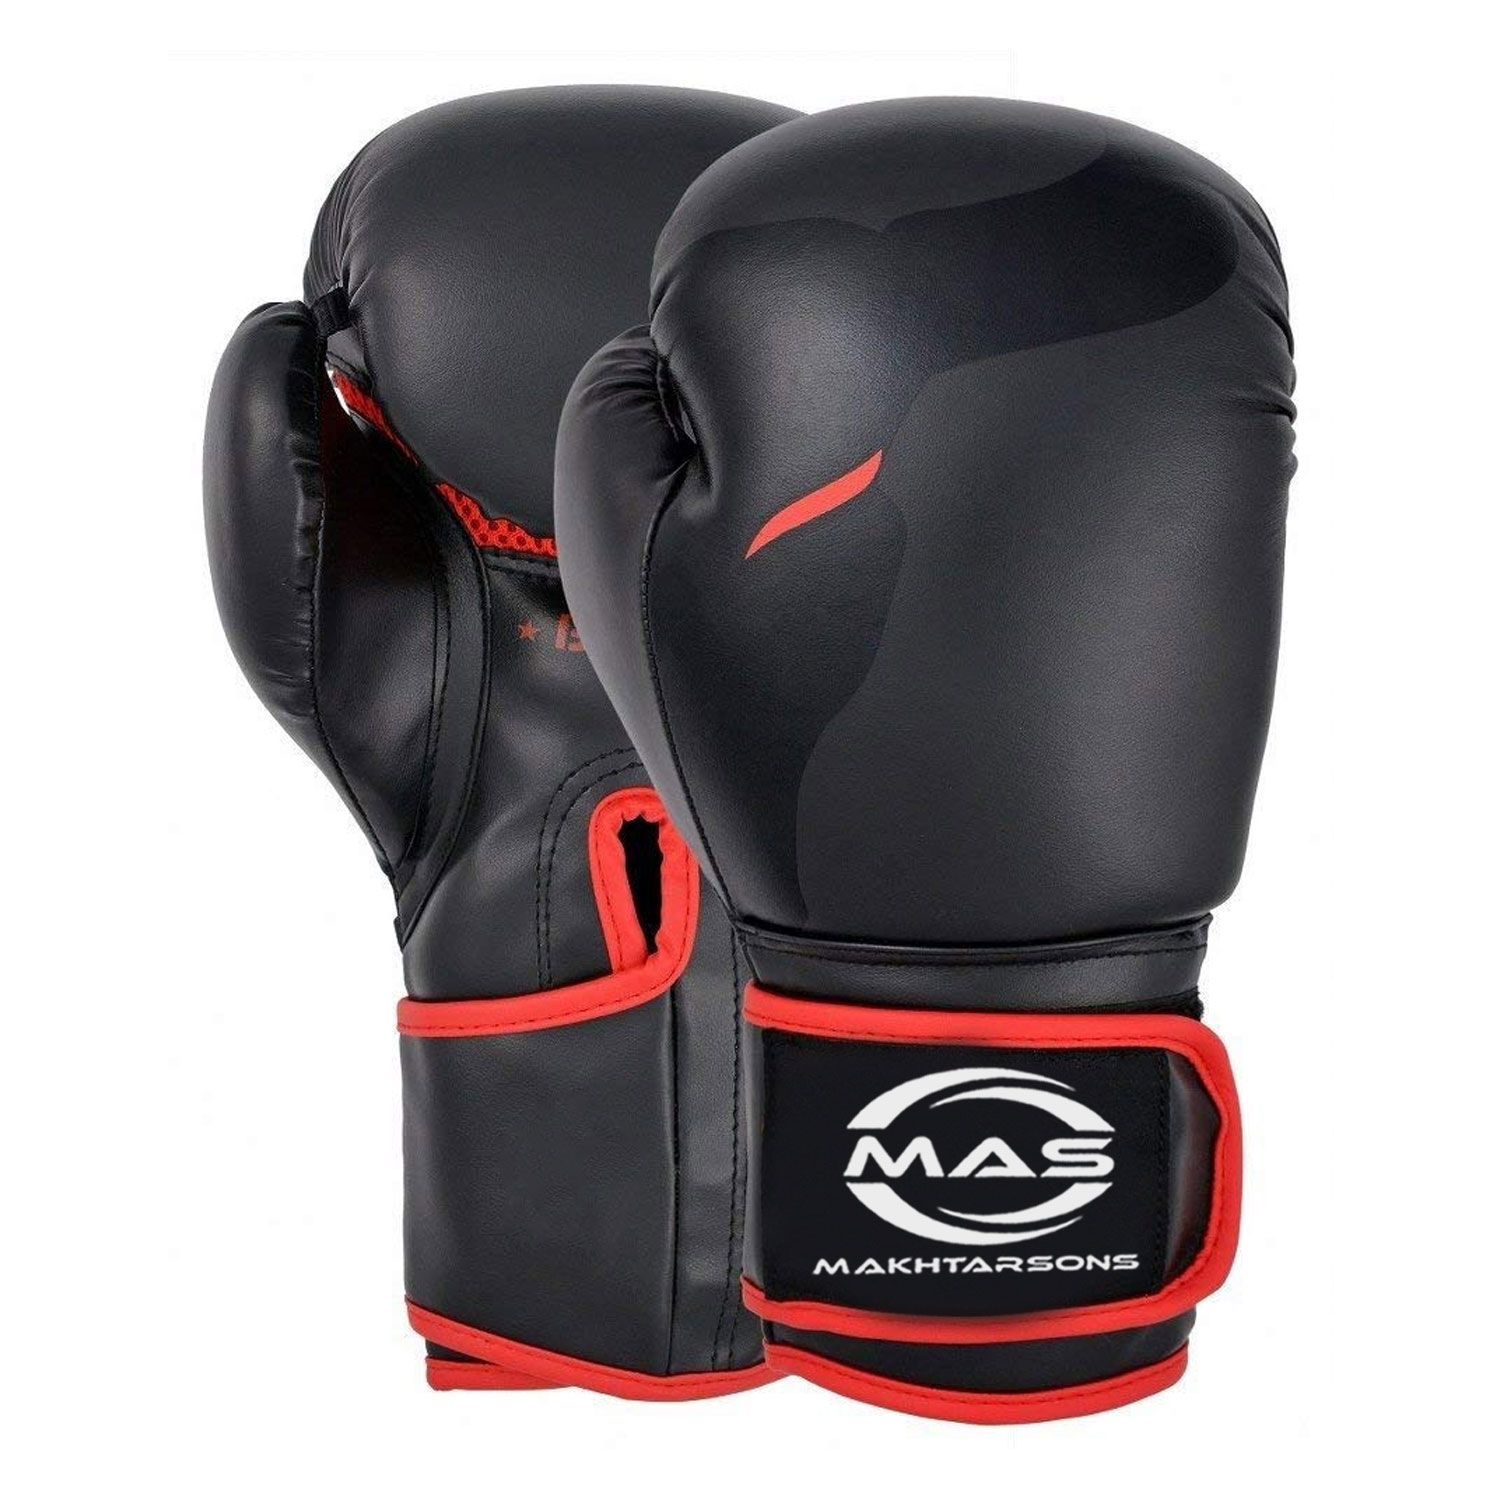 PROFESSIONAL BOXING GLOVES | MAS 207